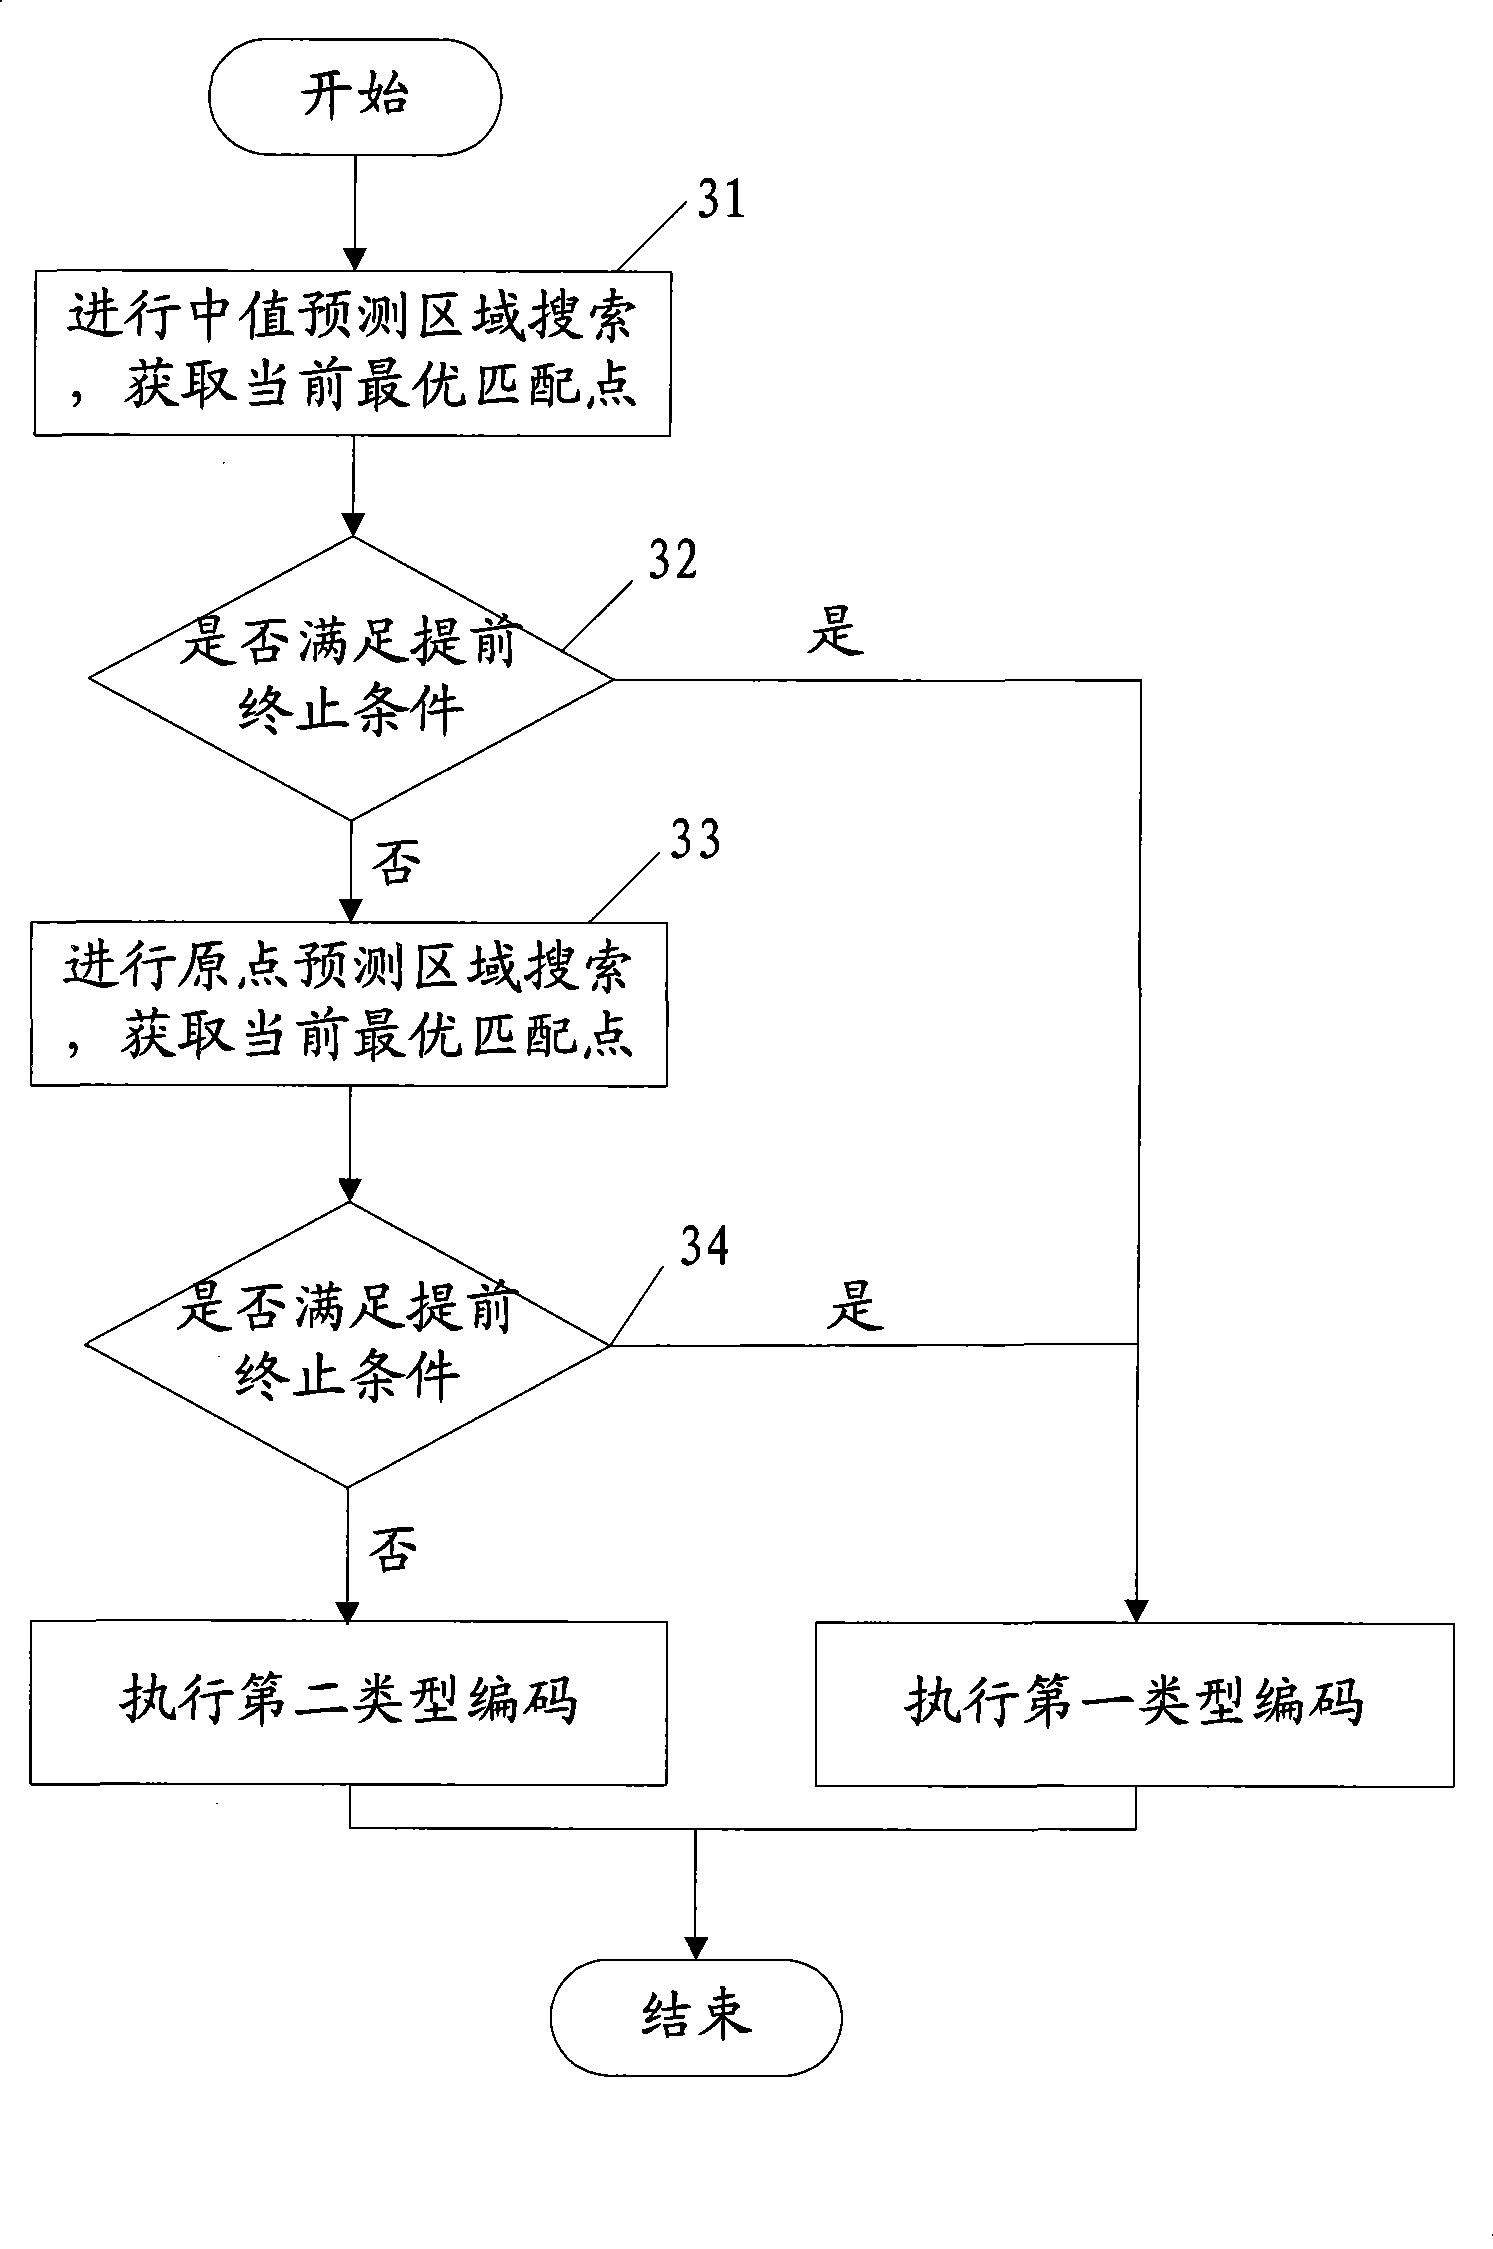 Image element motion estimating method and apparatus